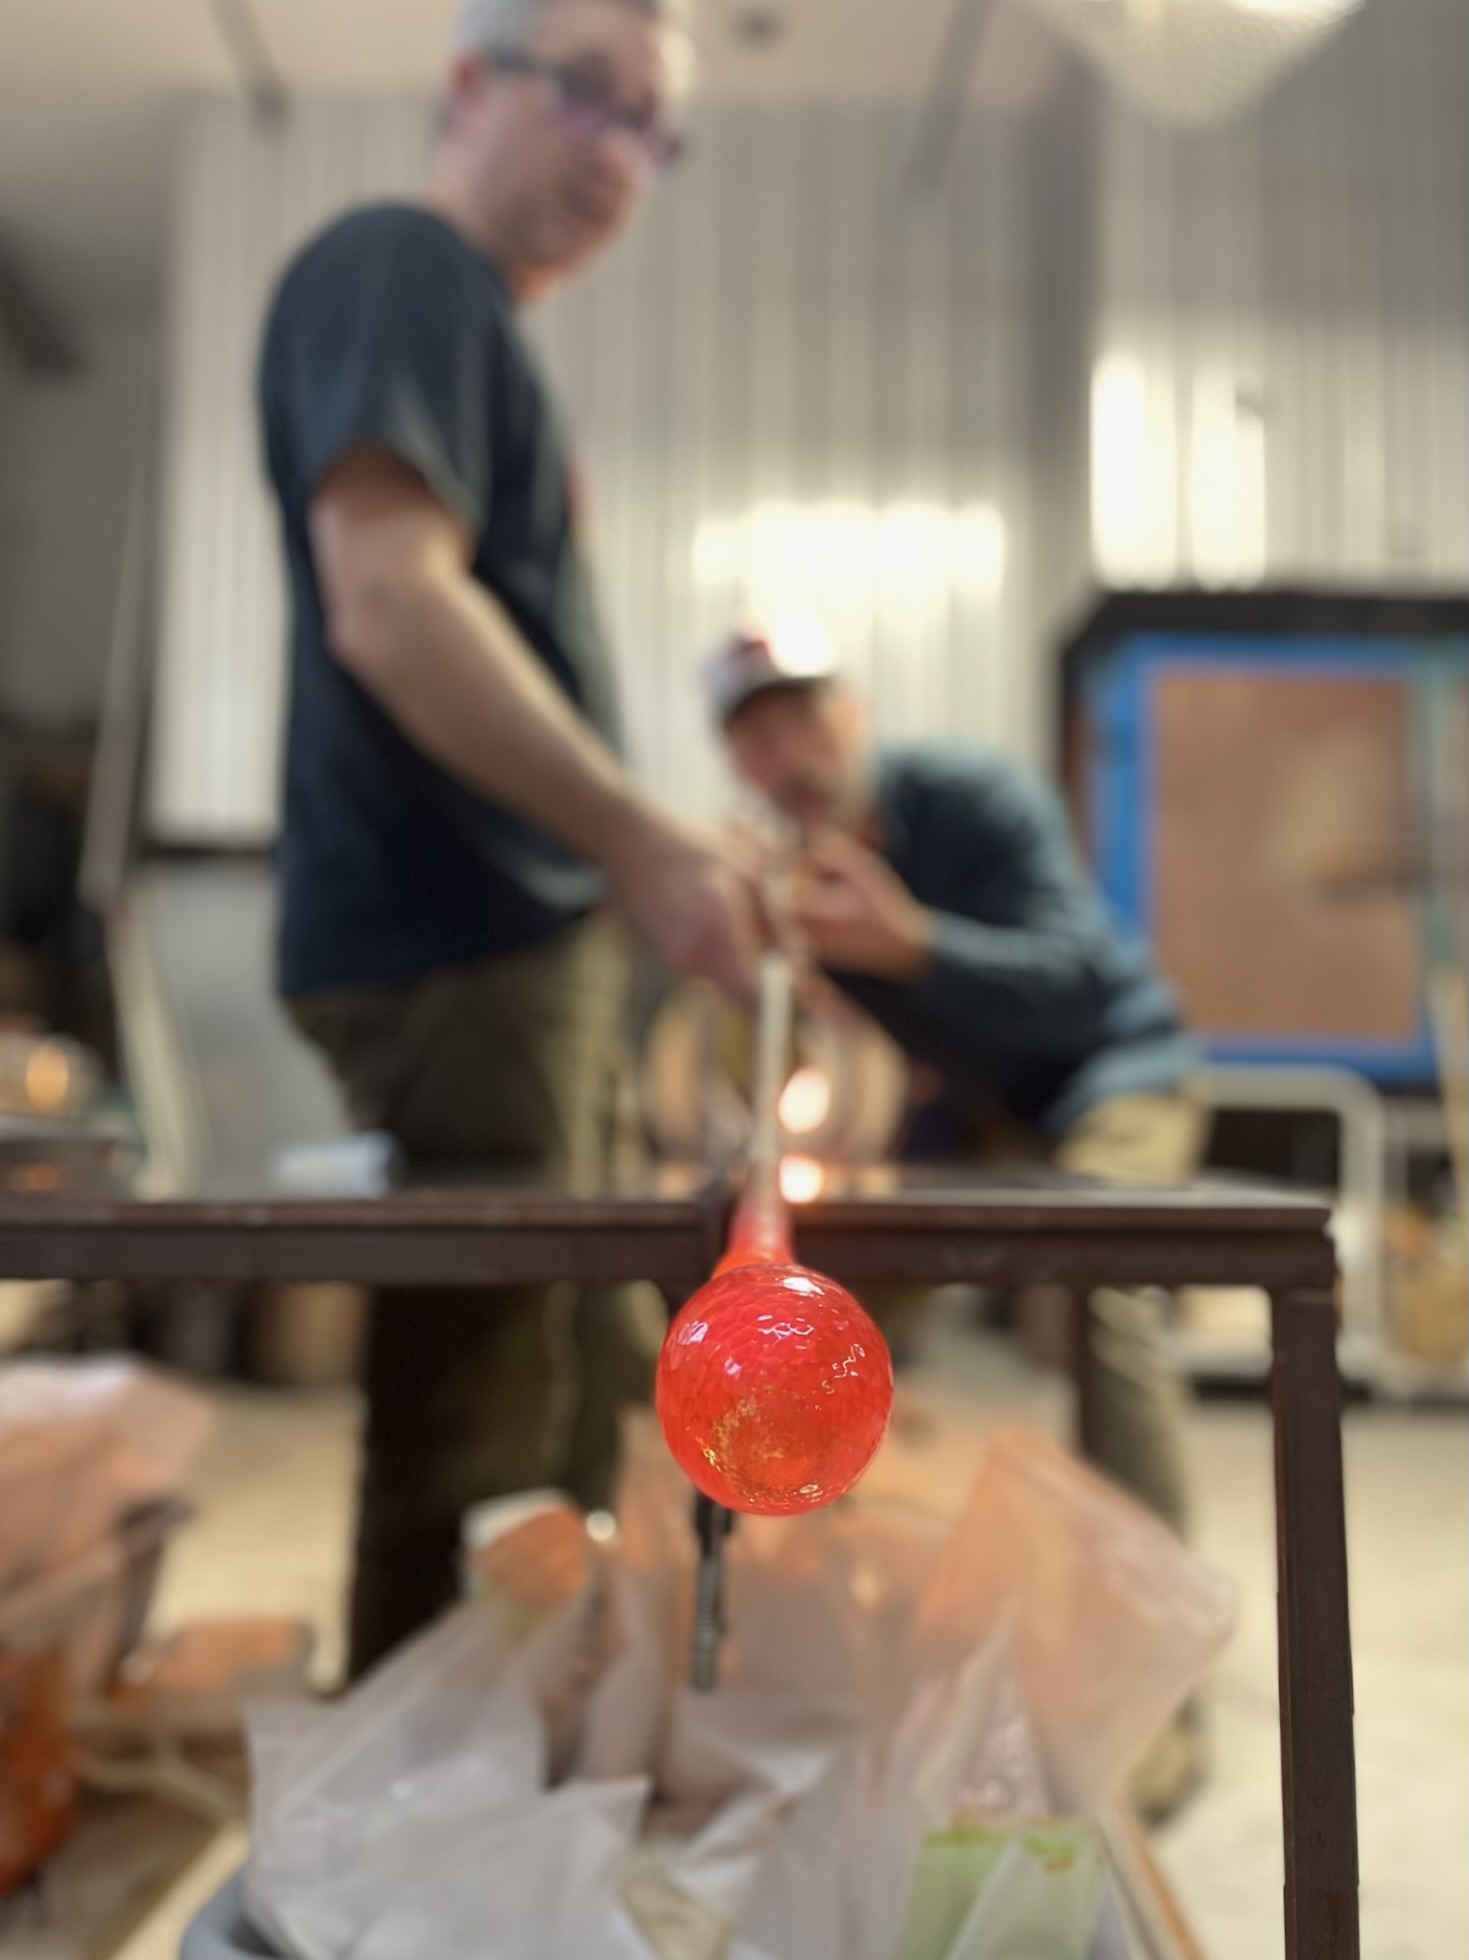 An image captures an artisan in a workshop, skillfully holding a rod tipped with brilliant, incandescent glass. This captivating sphere radiates an intense glow of molten color and heat. In the backdrop, another worker is subtly blurred but visibly engaged, adding depth and energy to this dynamic crafts scene.